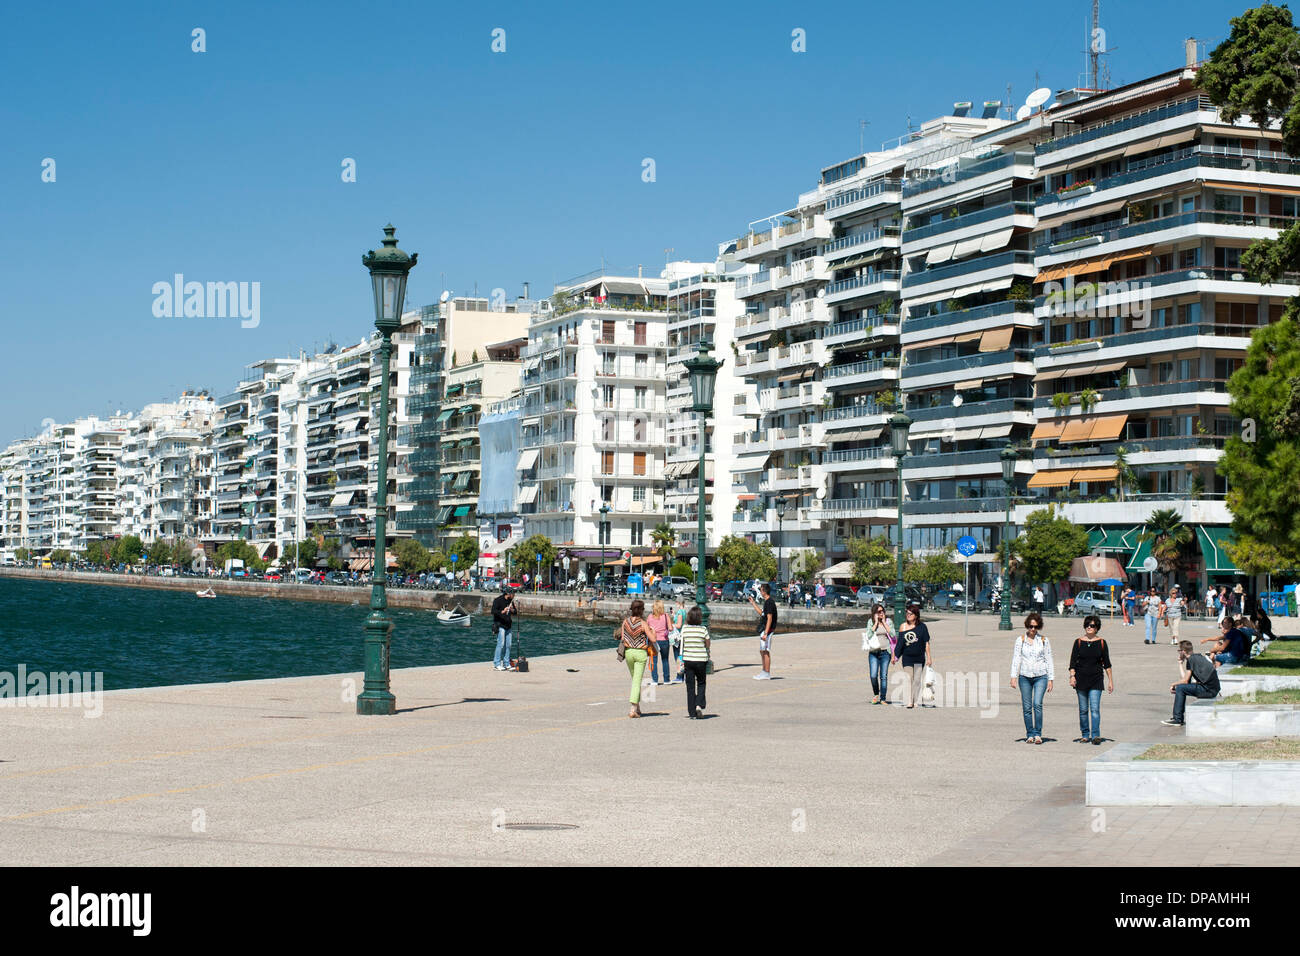 View of buildings on Nikis Avenue and pedestrians strolling on the waterfront in Thessaloniki, Greece. Stock Photo